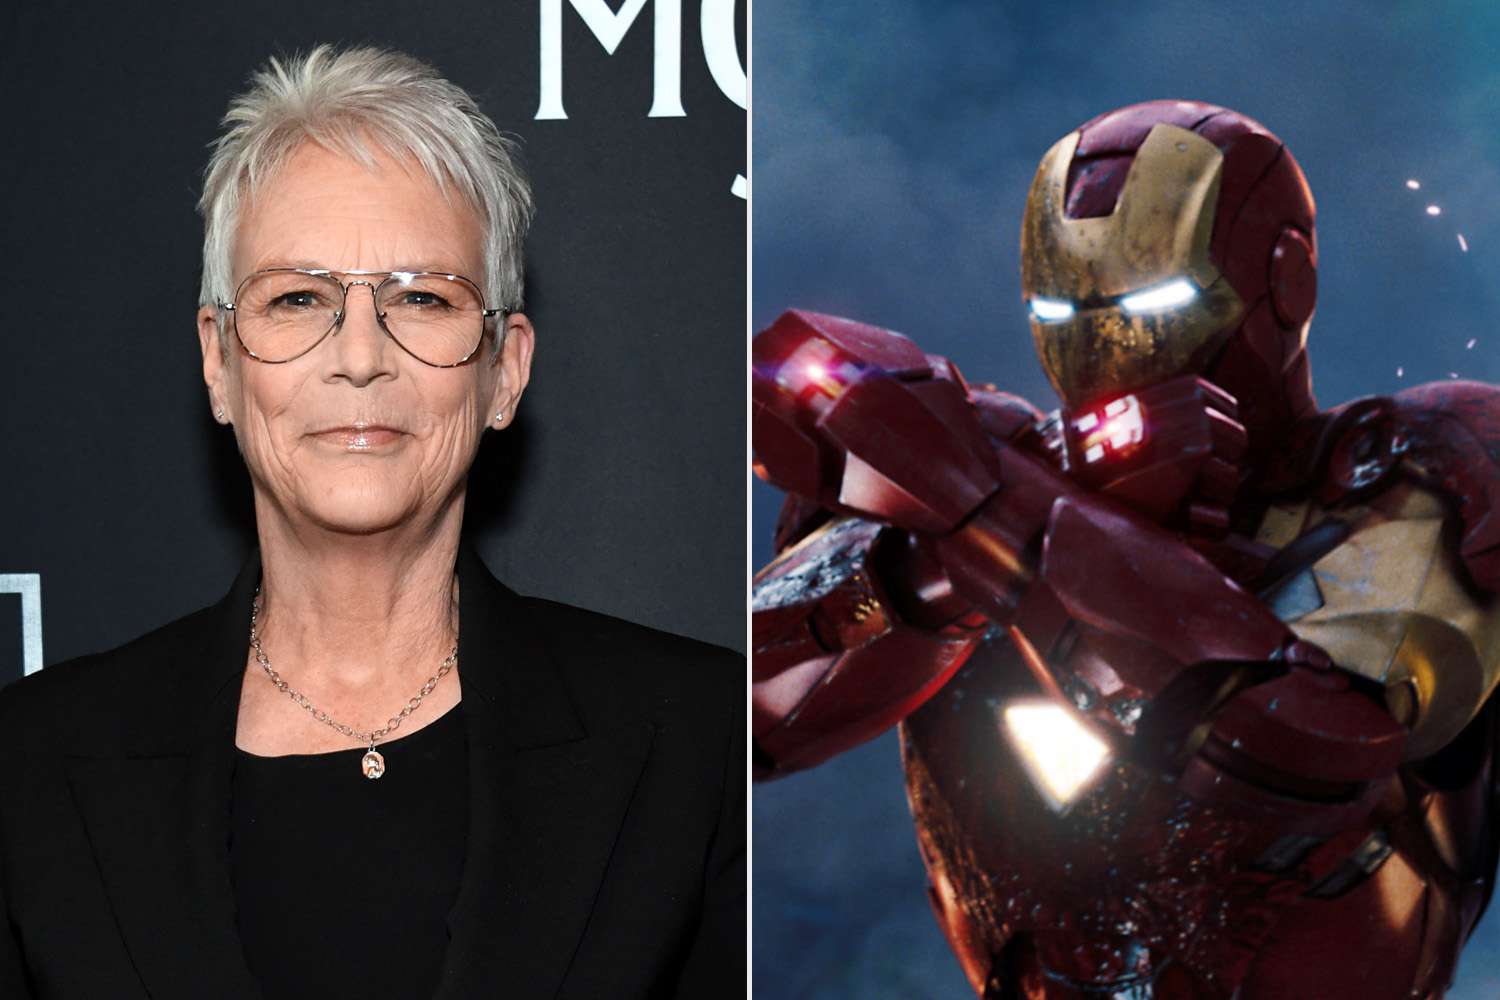 Jamie Lee Curtis backtracks, calls her shady Marvel comment 'stupid': 'I will do better'